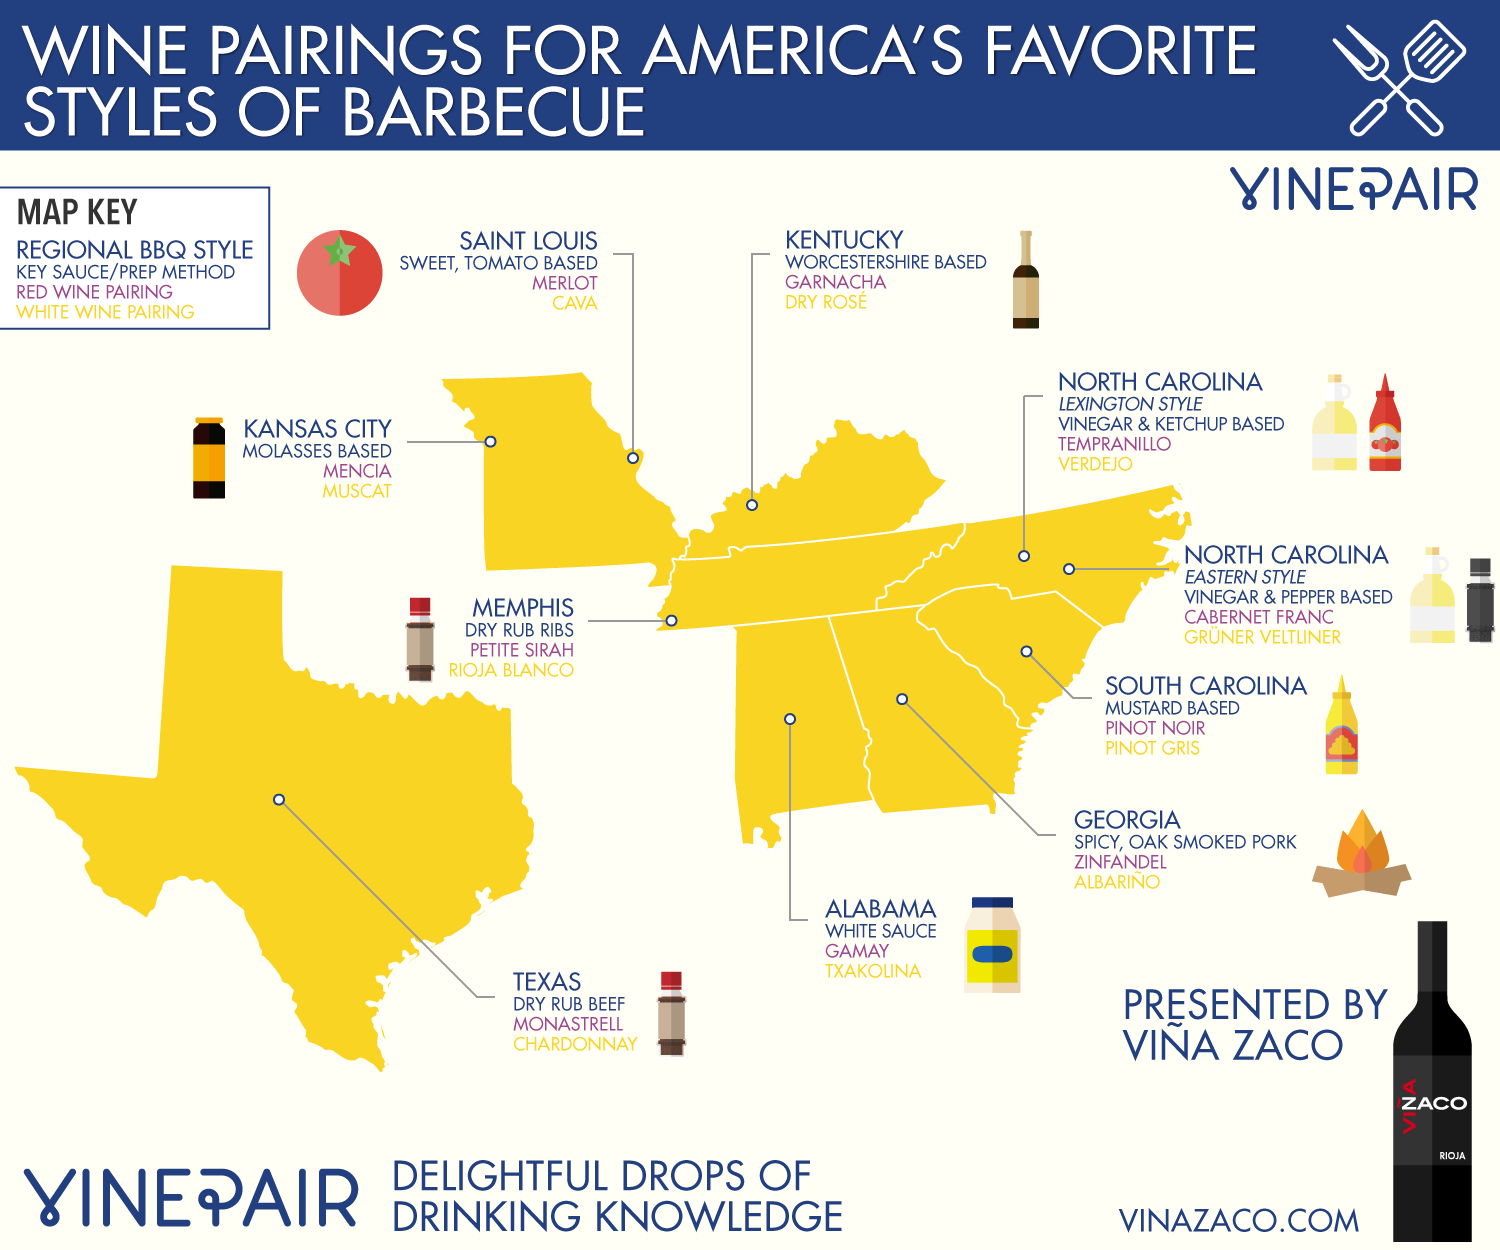 Wine Pairings For America's Favorite Styles Of Barbecue INFOGRAPHIC